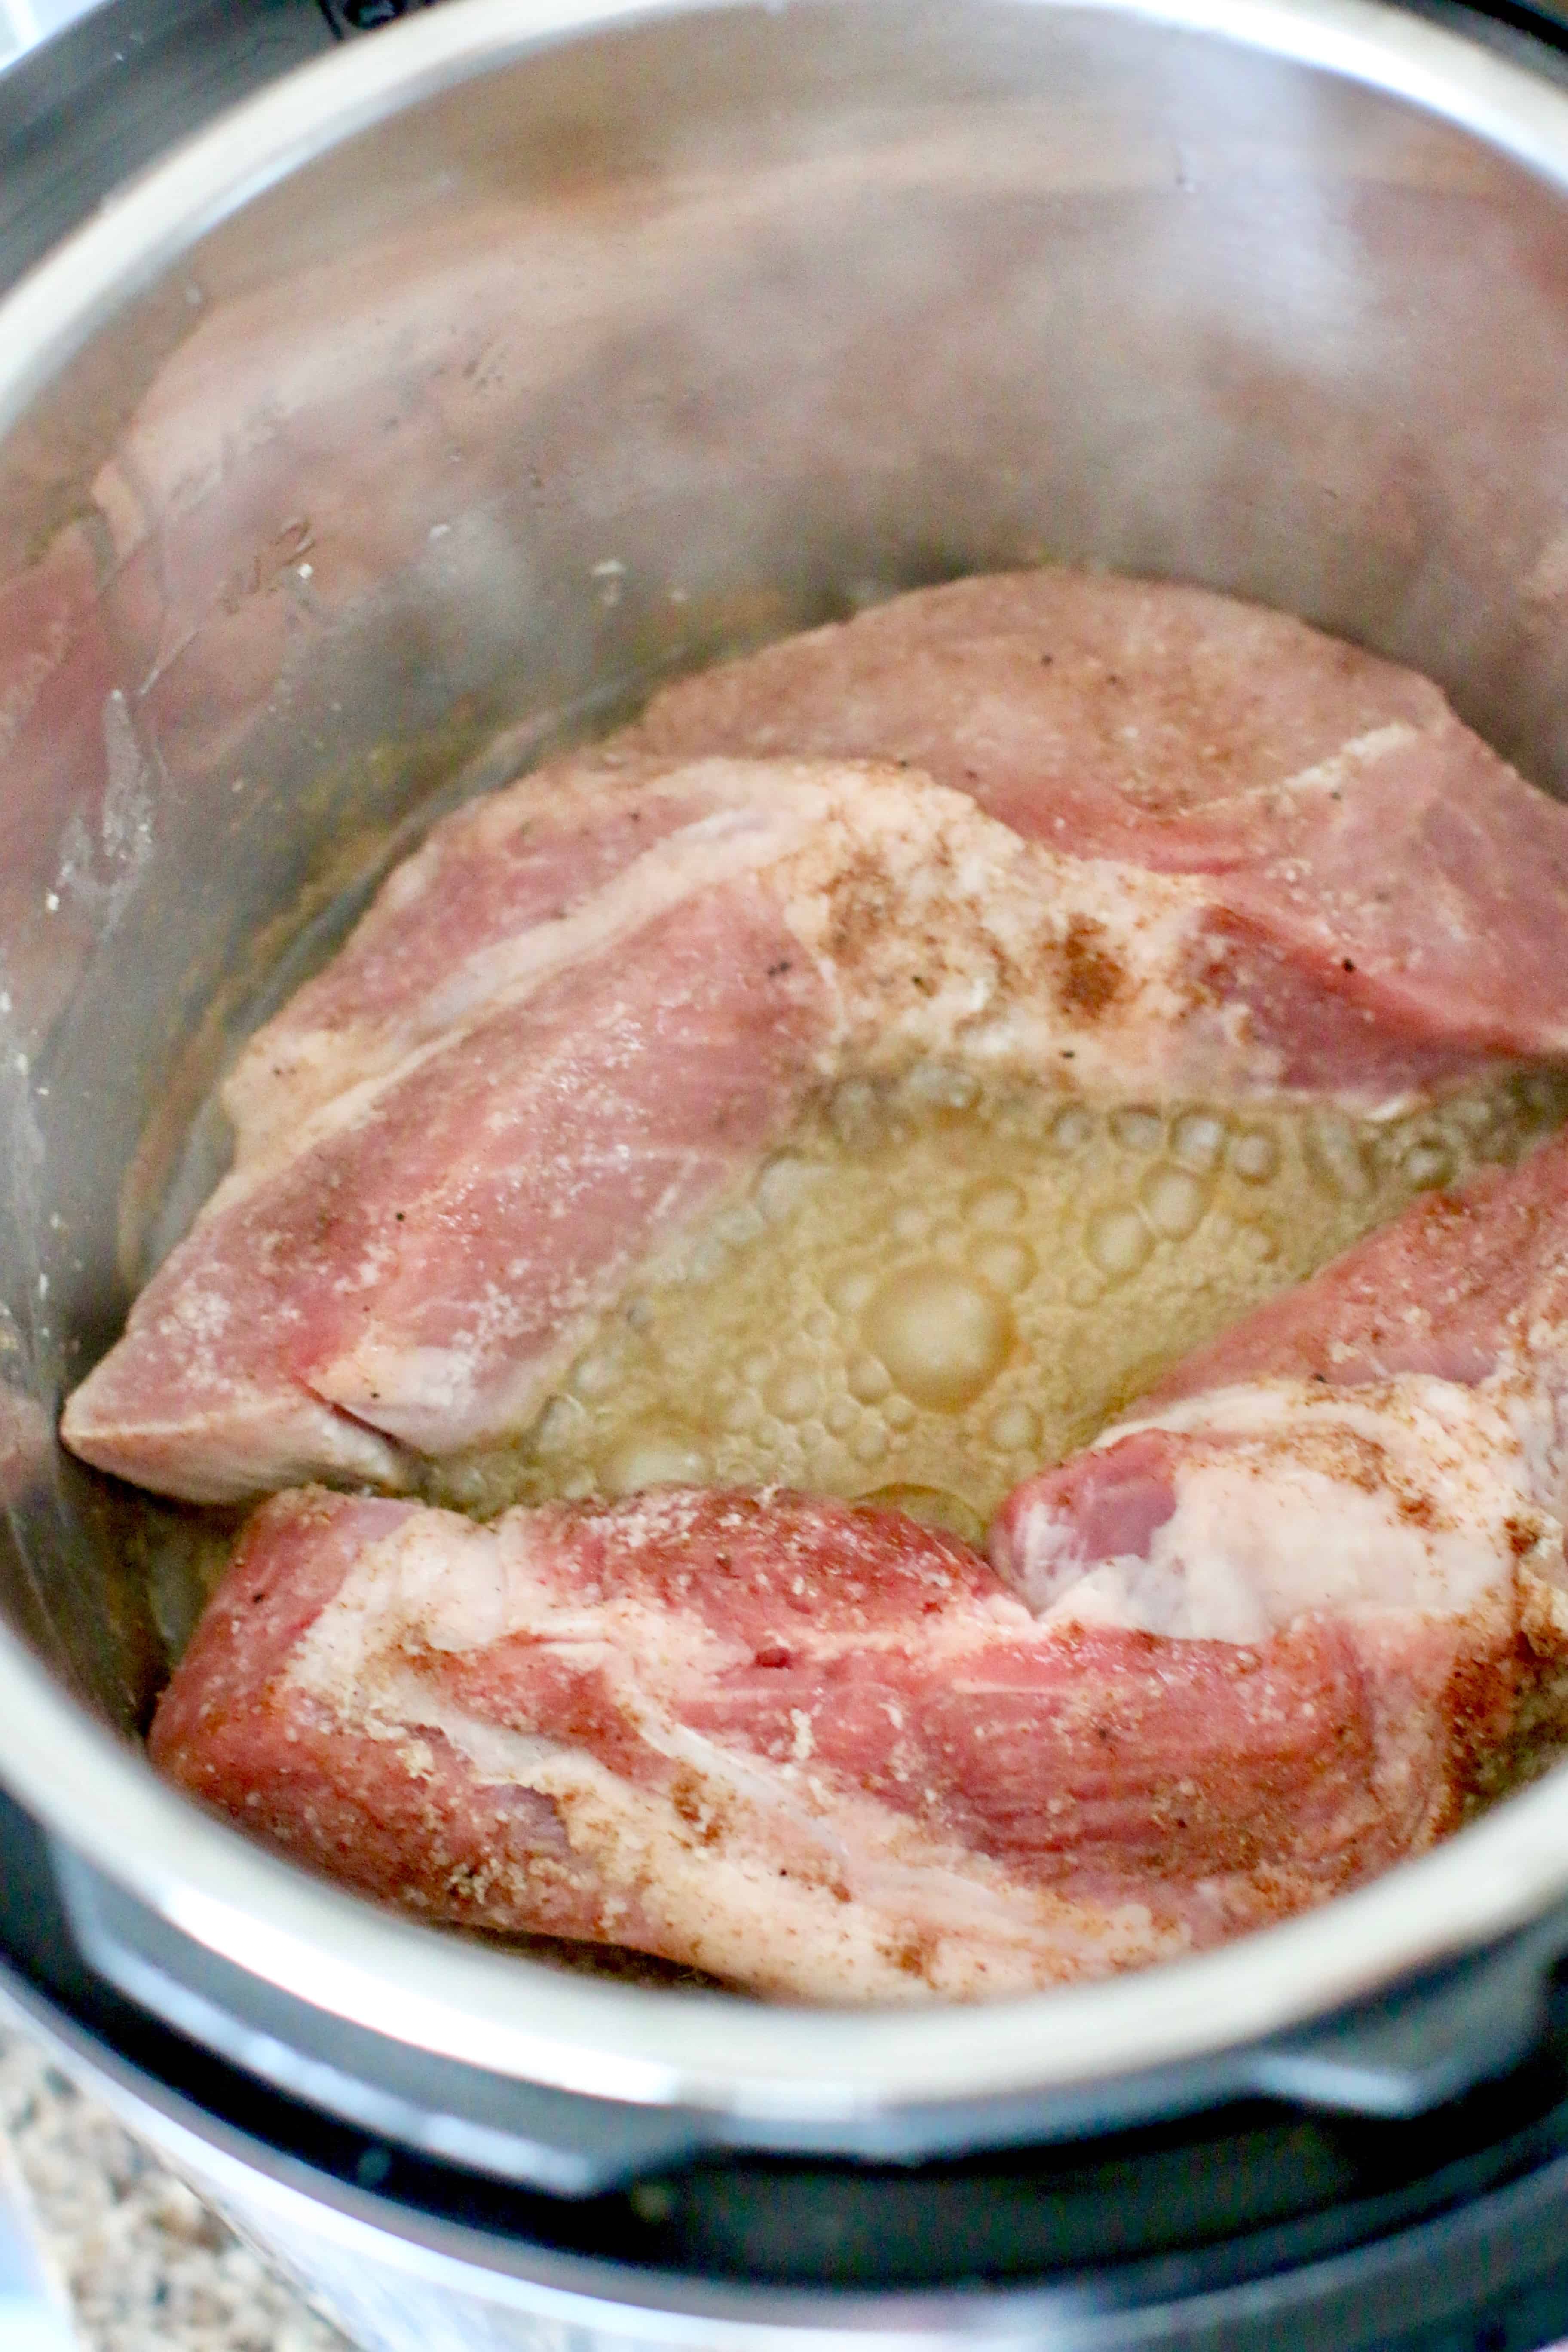 saute setting, Instant Pot, browning meat.